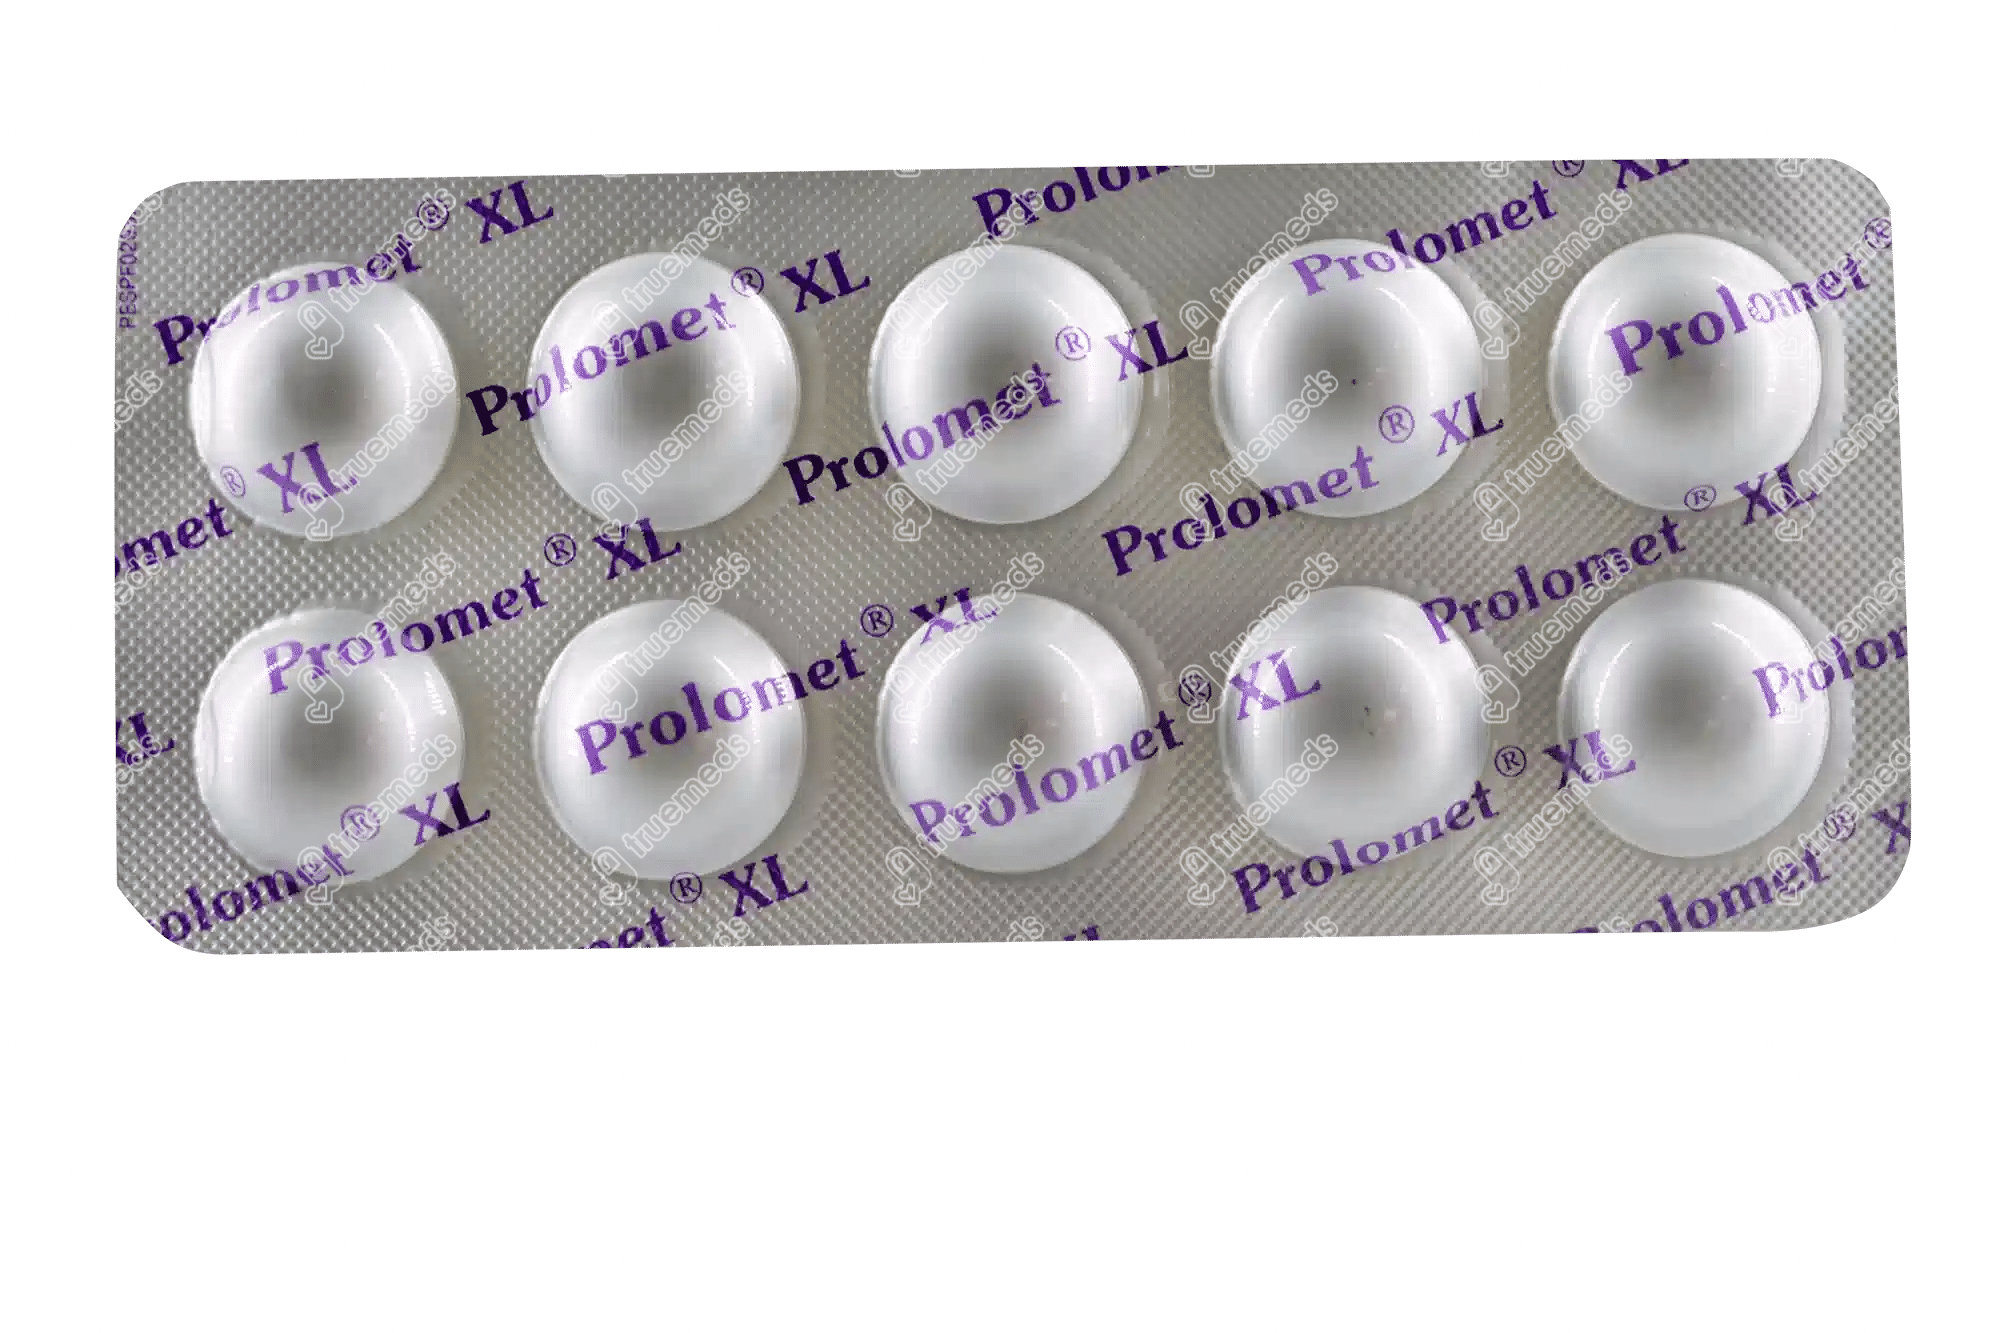 Prolomet Xl 50 MG Tablet XL - Uses, Dosage, Side Effects, Price